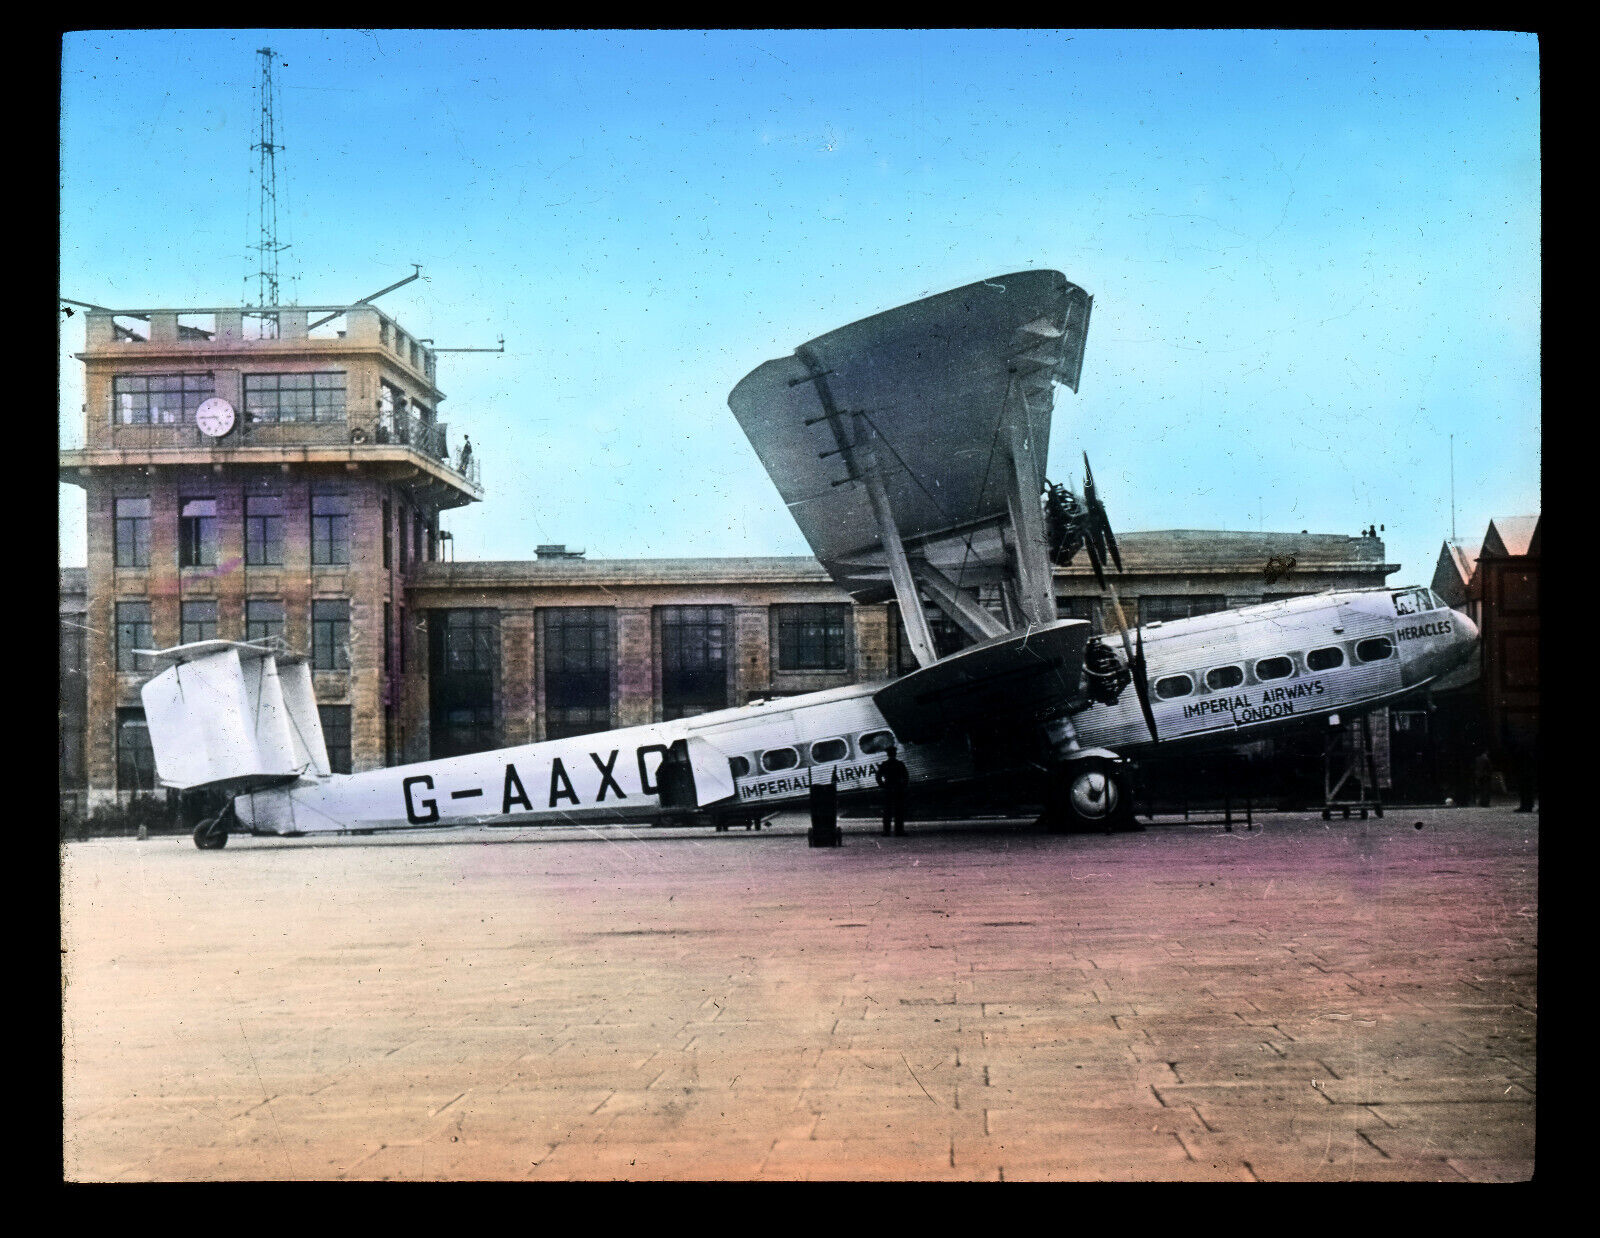 Glass Slide Aircraft Imperial Airways Handley Page HP45 Croydon Airport G-AAXD